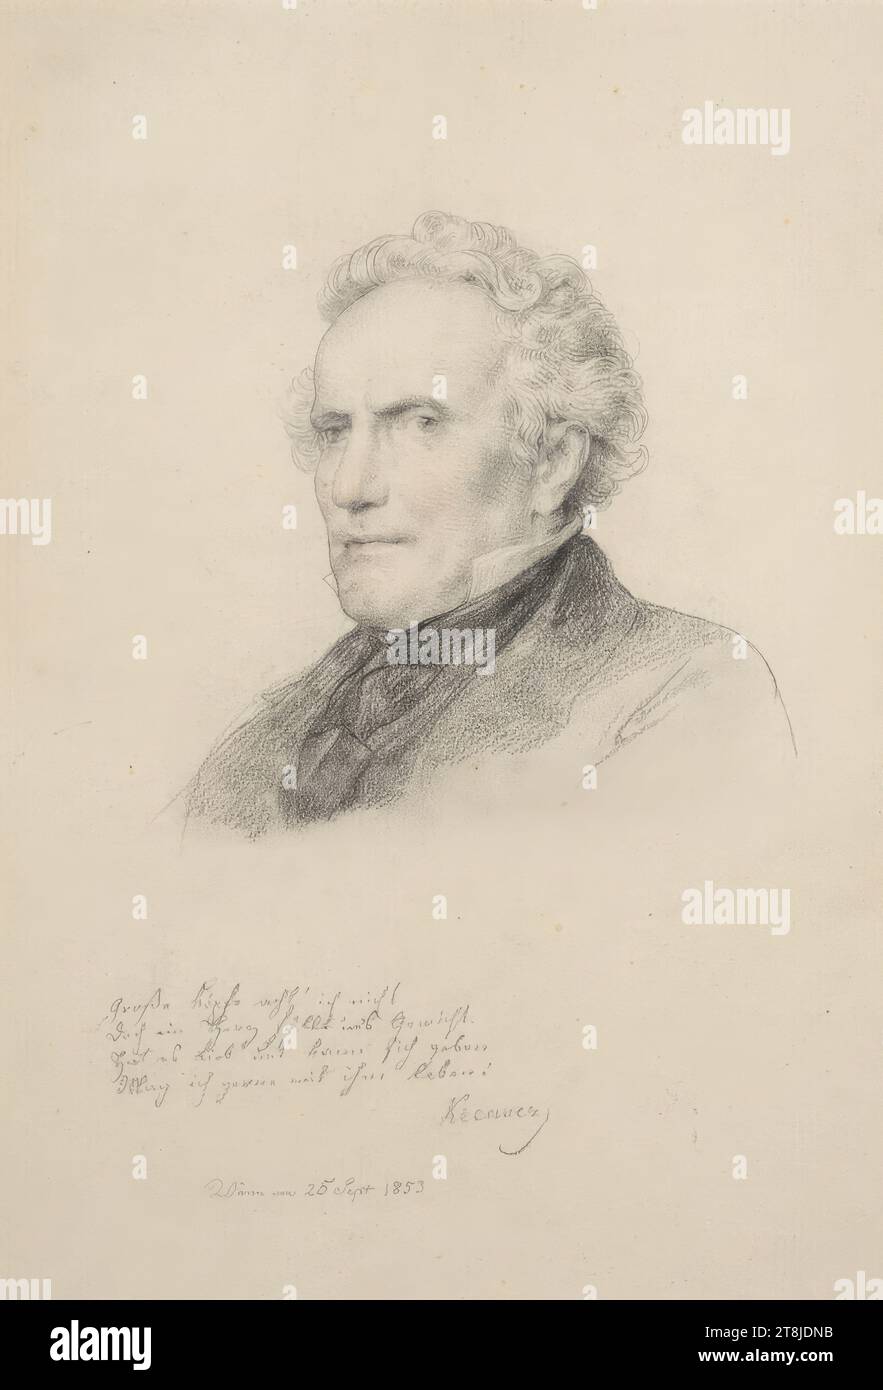 Portrait of Kerecseny, Leopold Kupelwieser, Markt Piesting 1796 - 1862 Vienna, 1853, drawing, lead pen, red chalk, passepartout section: 33.3 x 23.cm, 13 1/8 x 9 1/16in., l.l. I don’t pay attention to 'big heads' / but a heart matters. / He loves it and can give himself/herself / I like living with him! / Kerecseny / Vienna on September 25, 1853, Austria Stock Photo